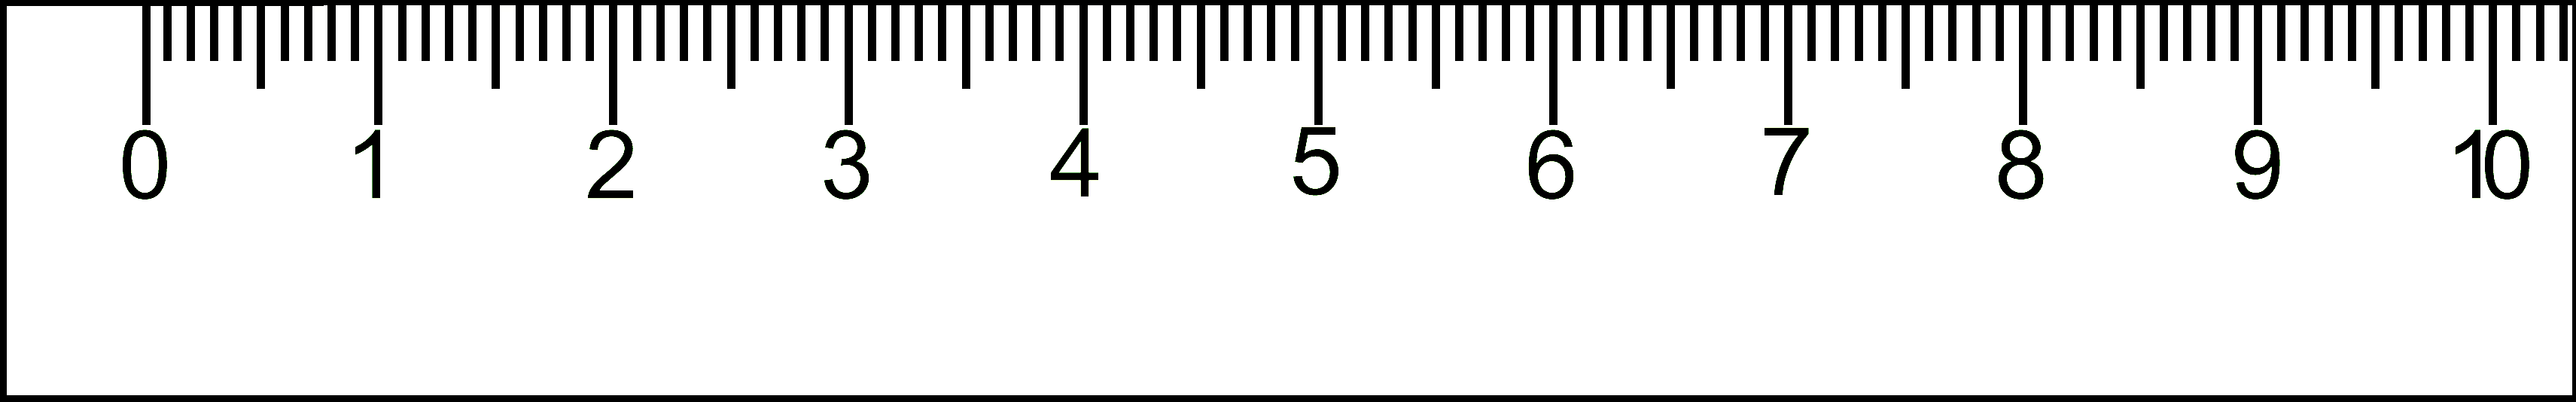 printable-ruler-12-inch-actual-size-printable-12-inch-ruler-with